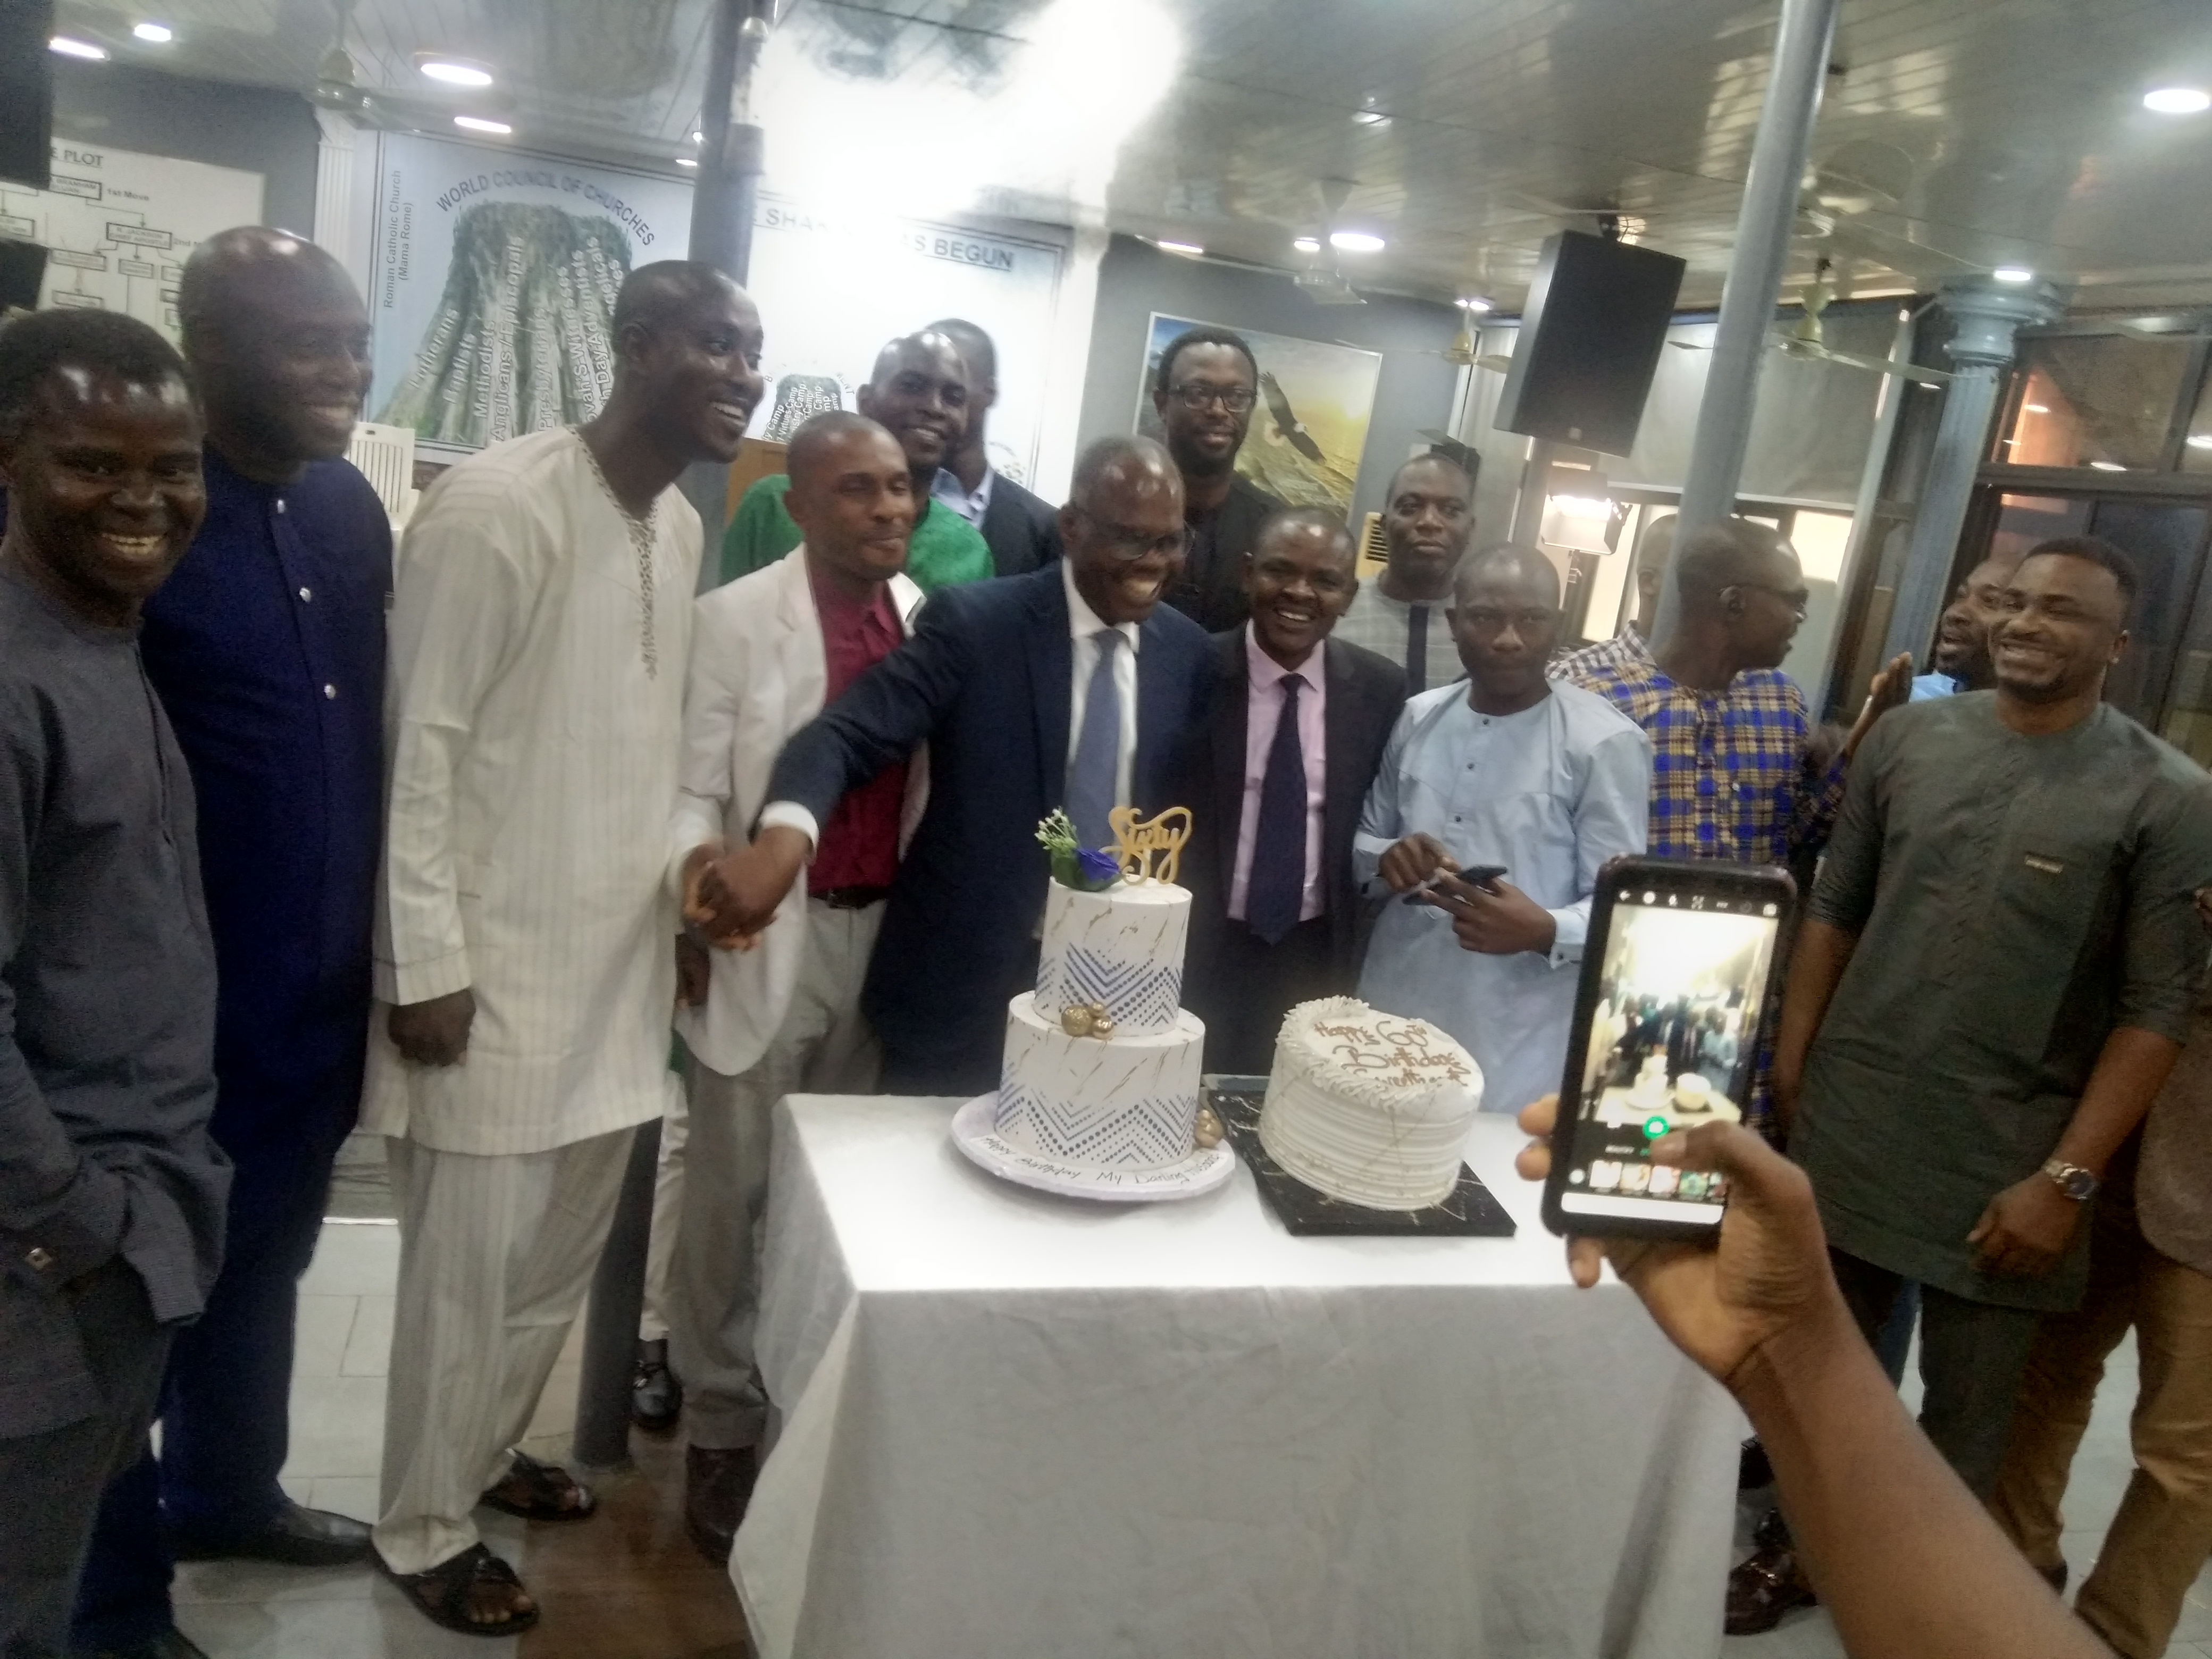 <span class='badge'>32</span> - (Sunday afternoon, 1st Jan. 2023, after service, at the taking of photos with Bro. Ifeanyi Nzekwe, on his 60th Birthday.)